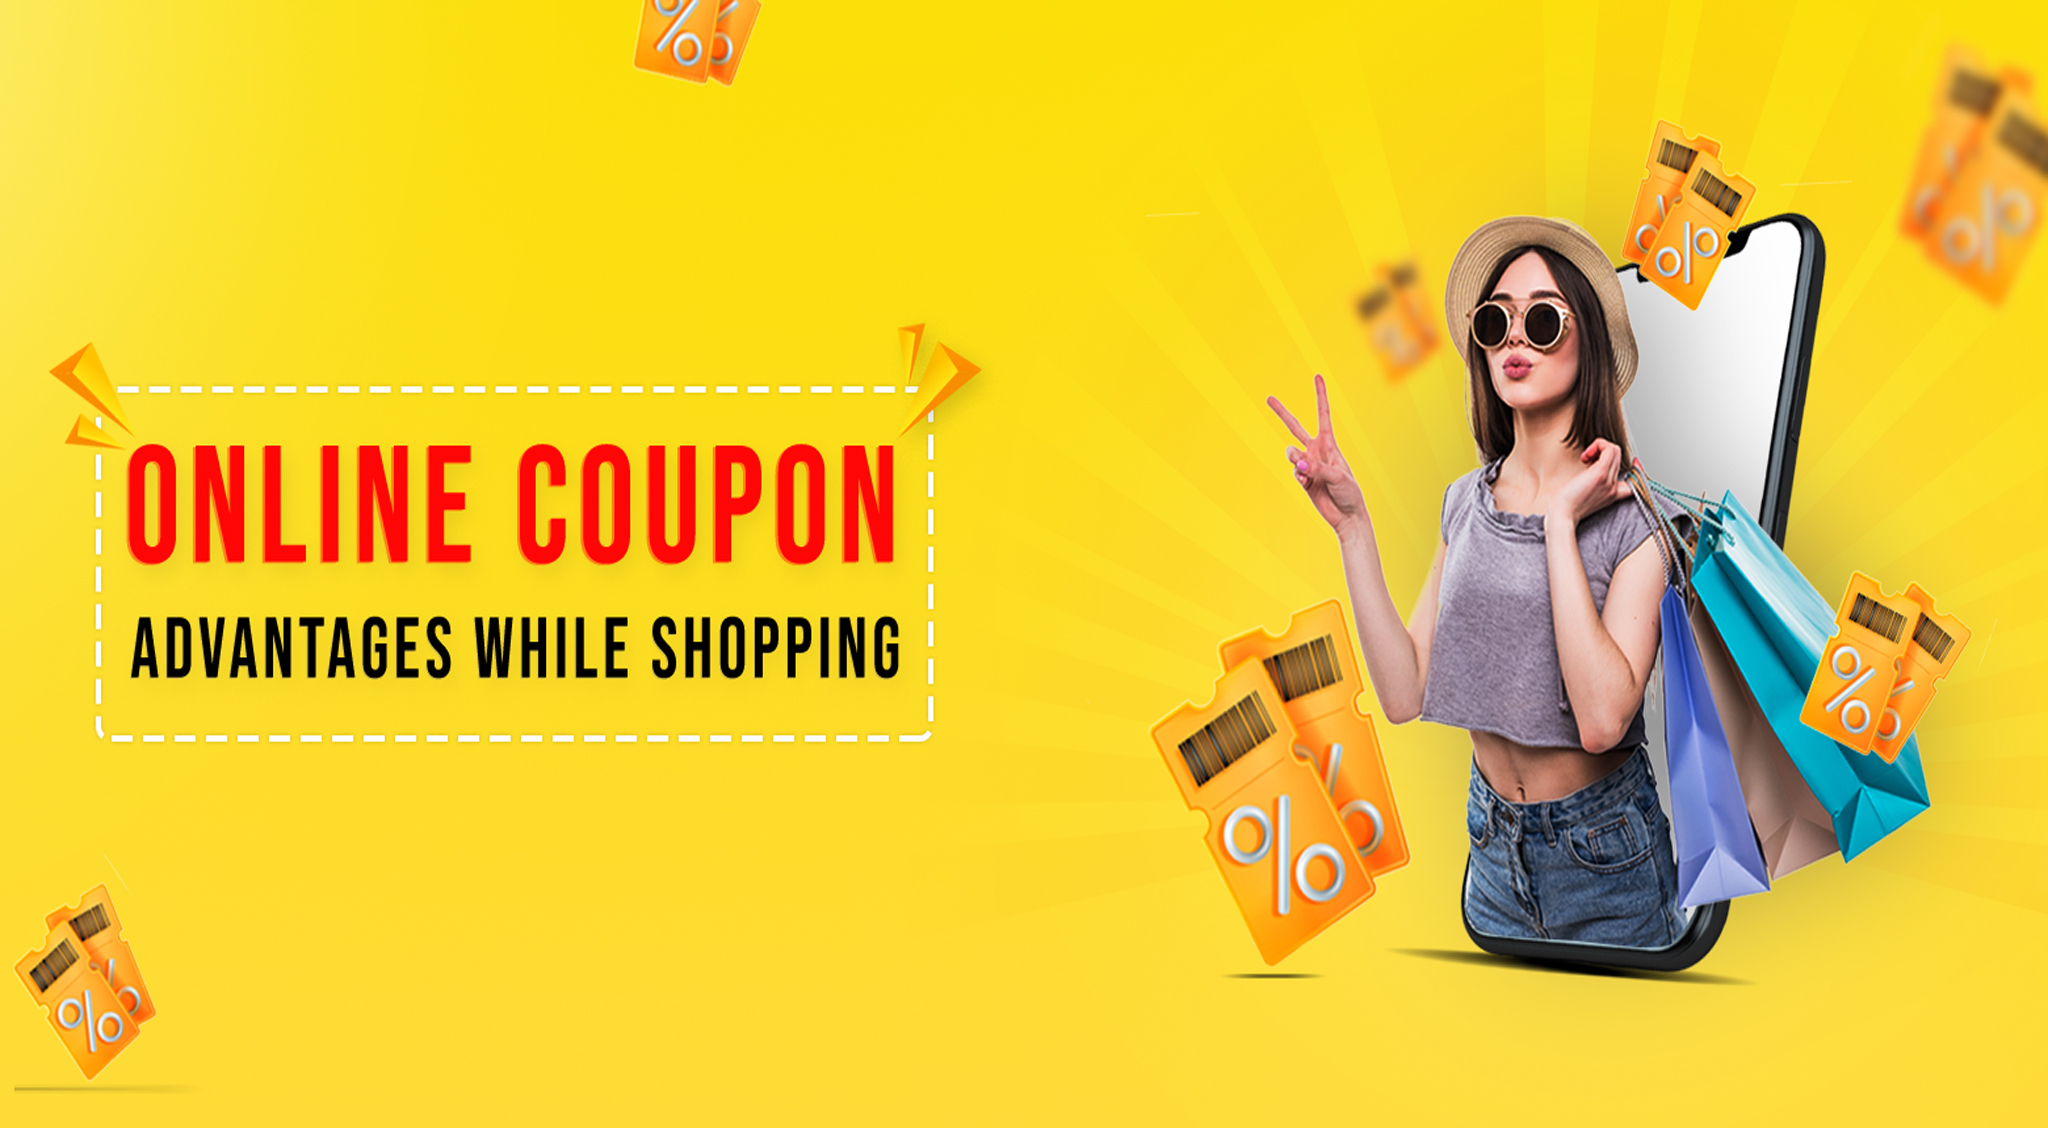 online shopping coupon code advantages